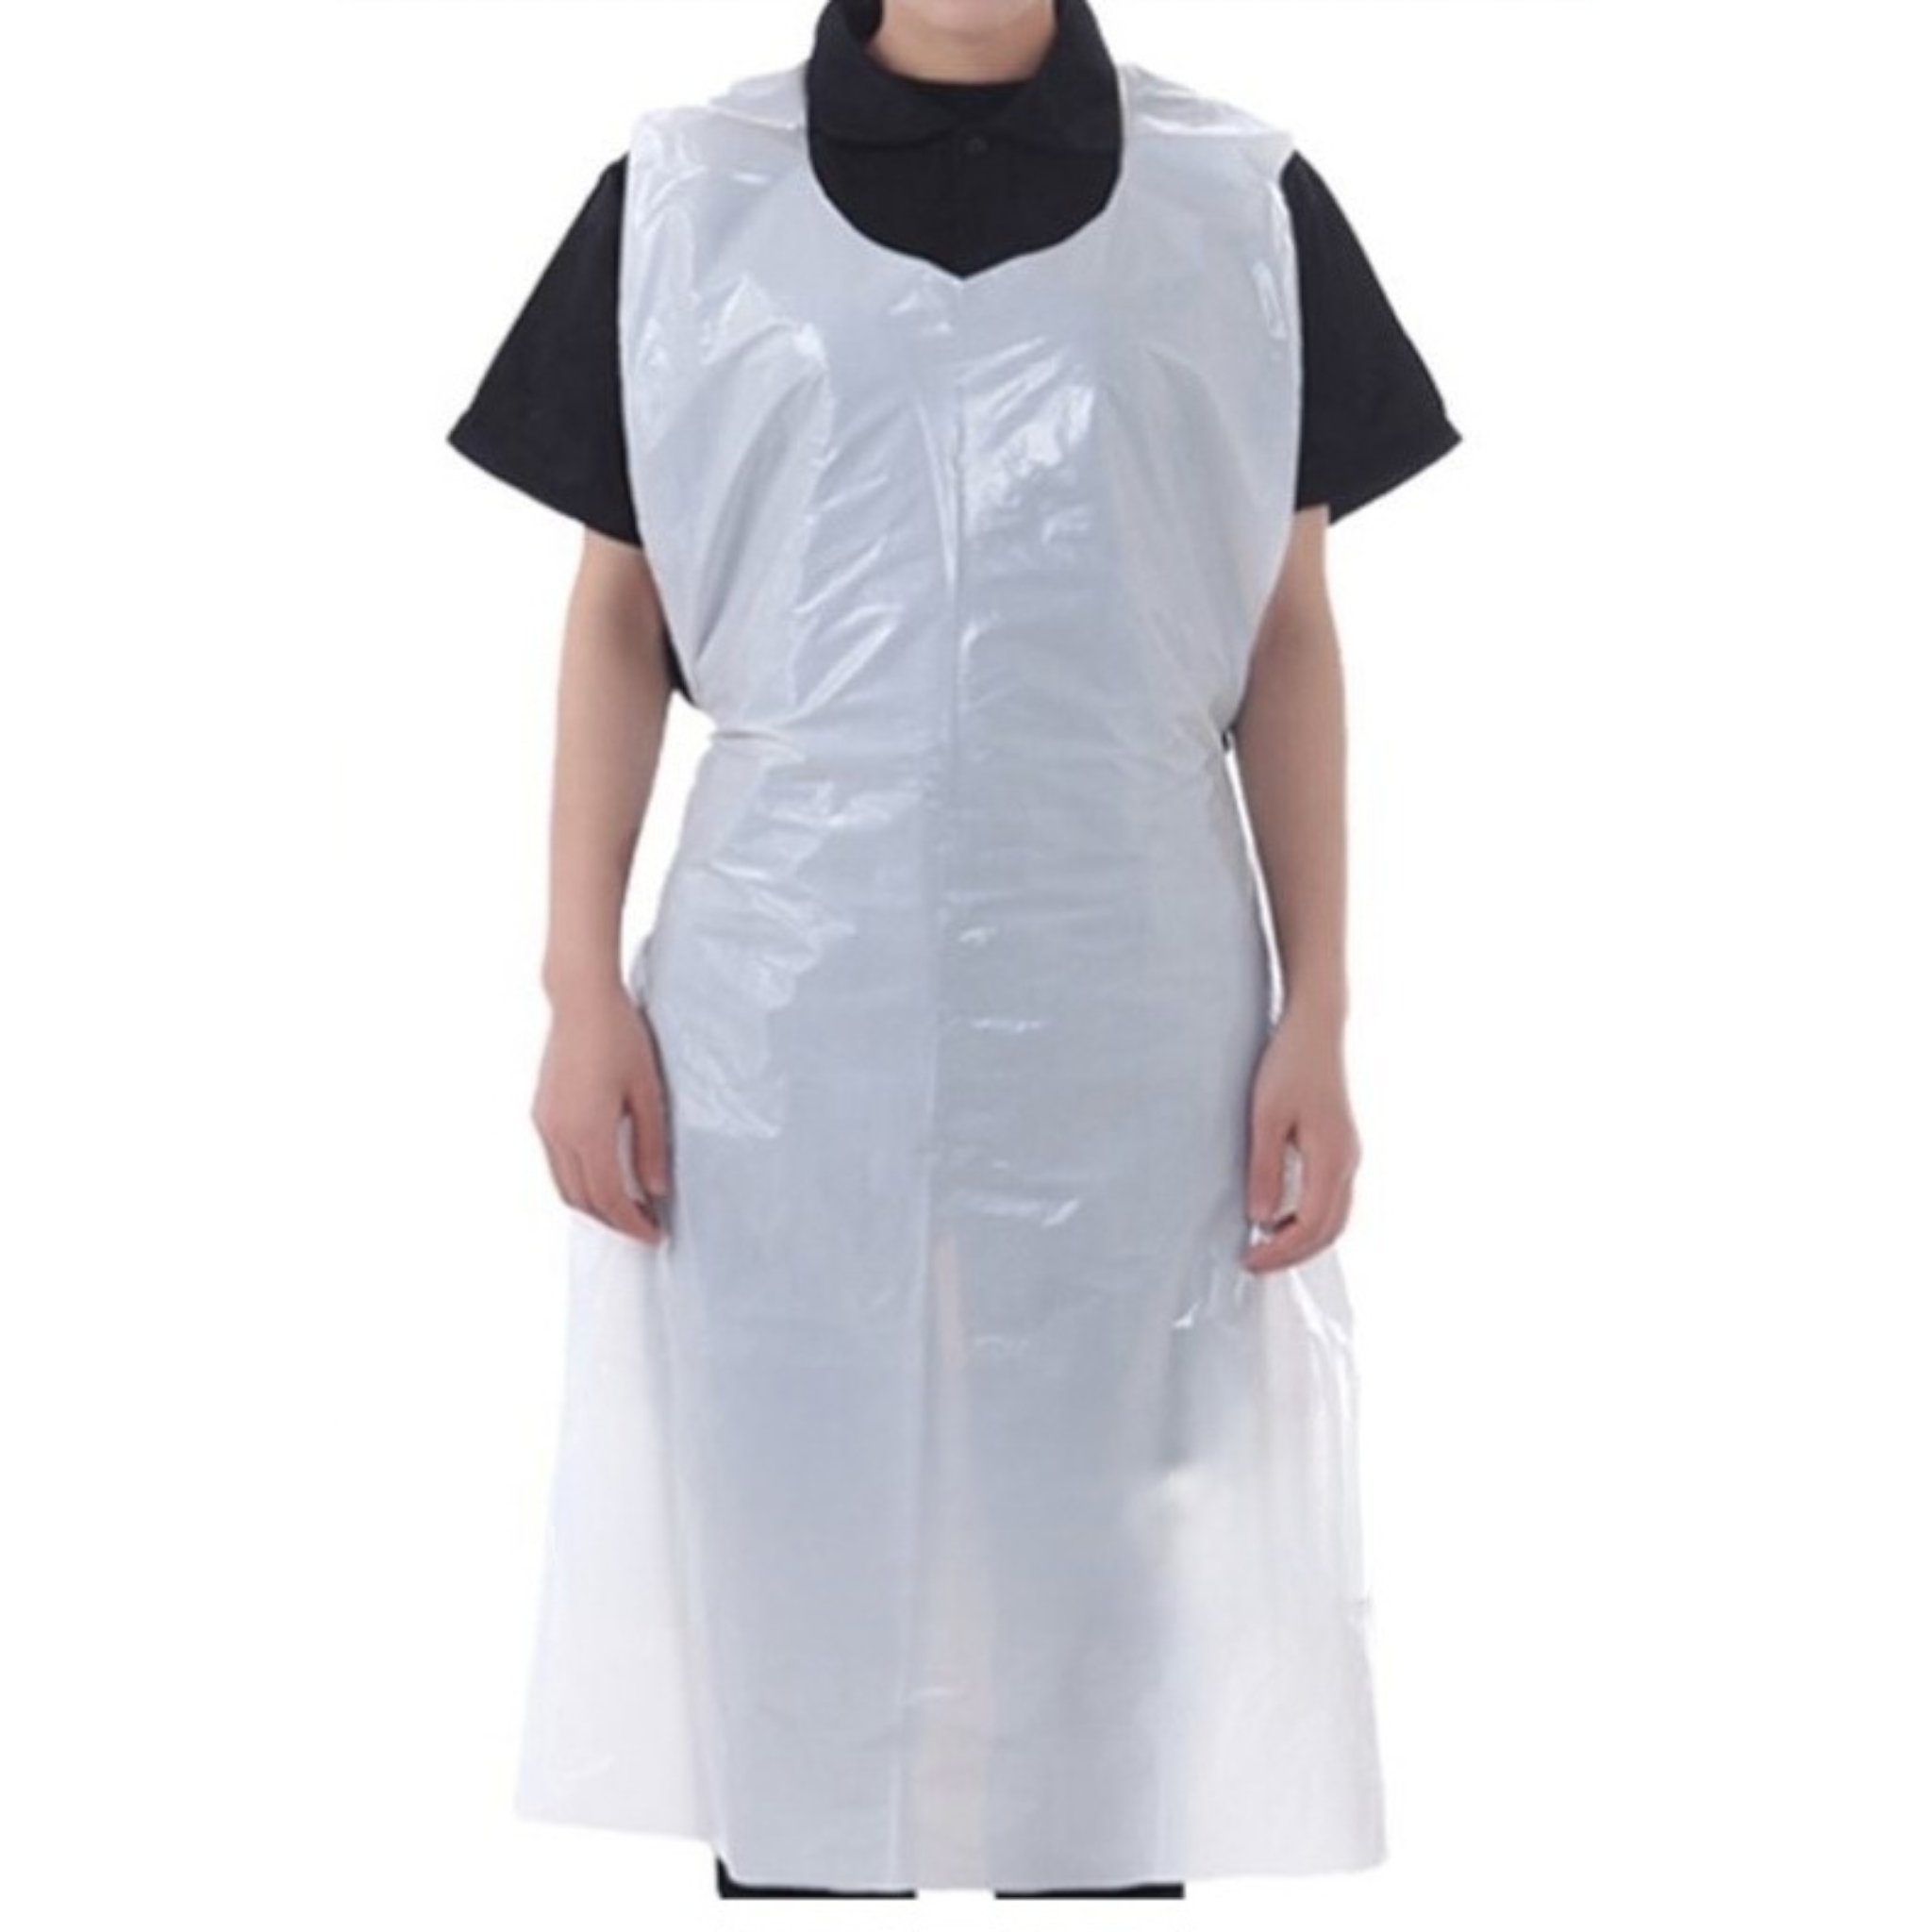 Apron Disposable Plastic White 660x1010mmx20mic 100pack